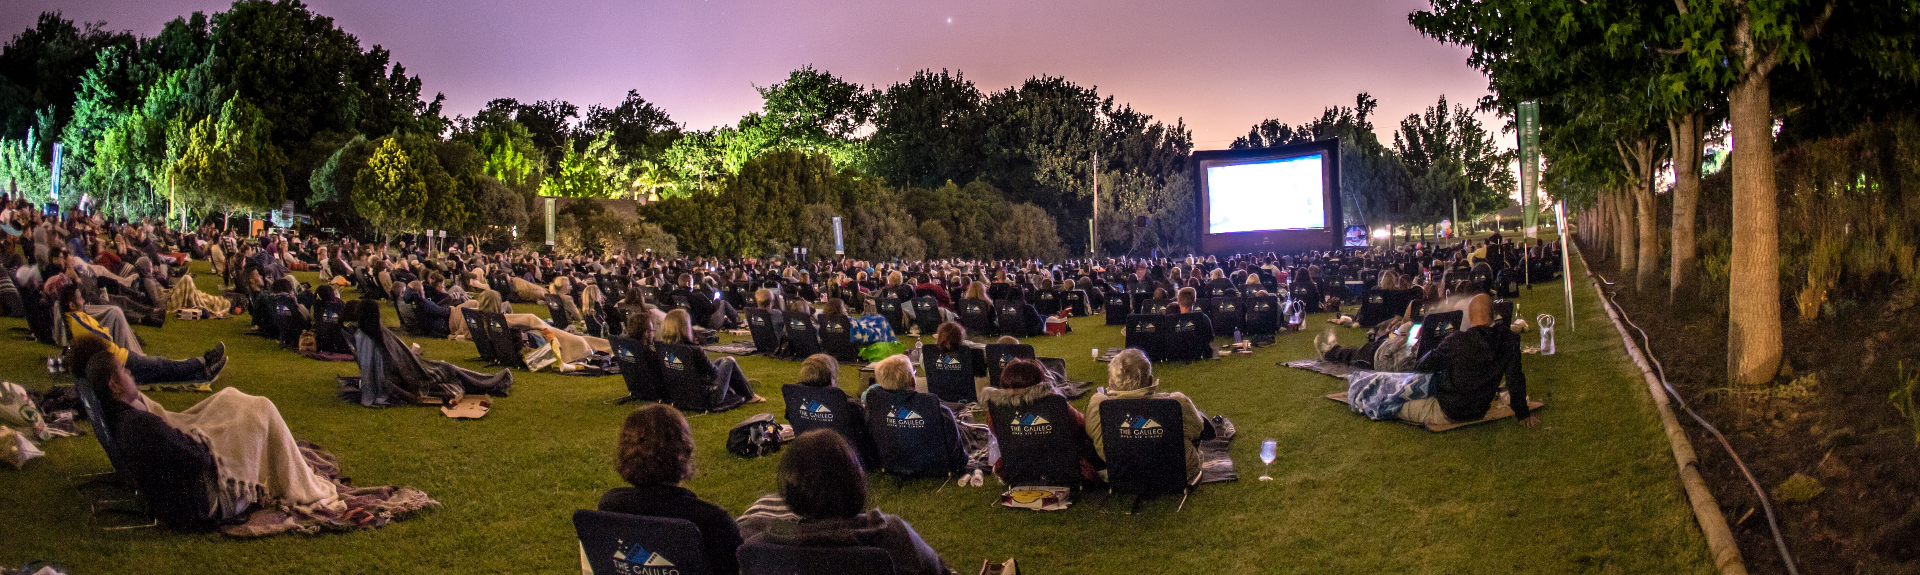 MOVIES BY MOONLIGHT – THE GALILEO PICNIC IS BACK!